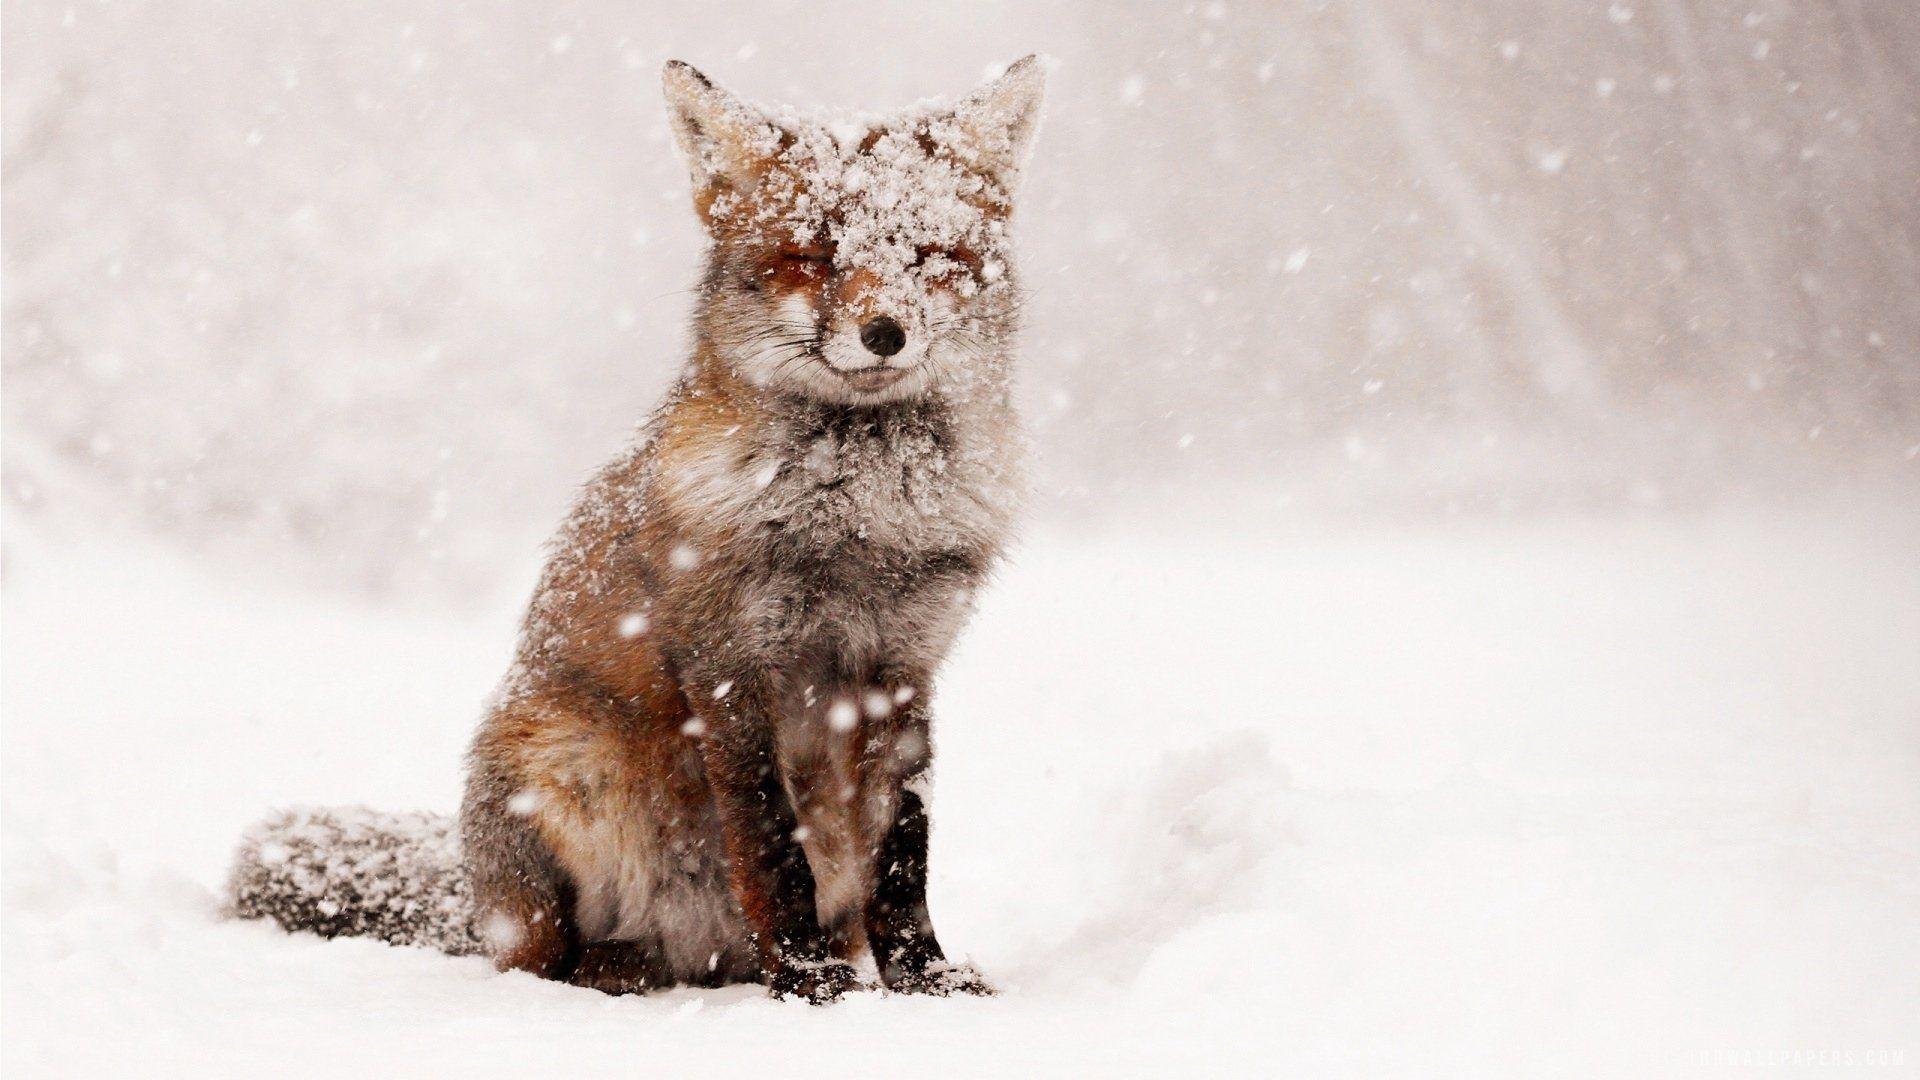 animals, lg, cool, free, winter nature, foxes, samsung, snow, cute